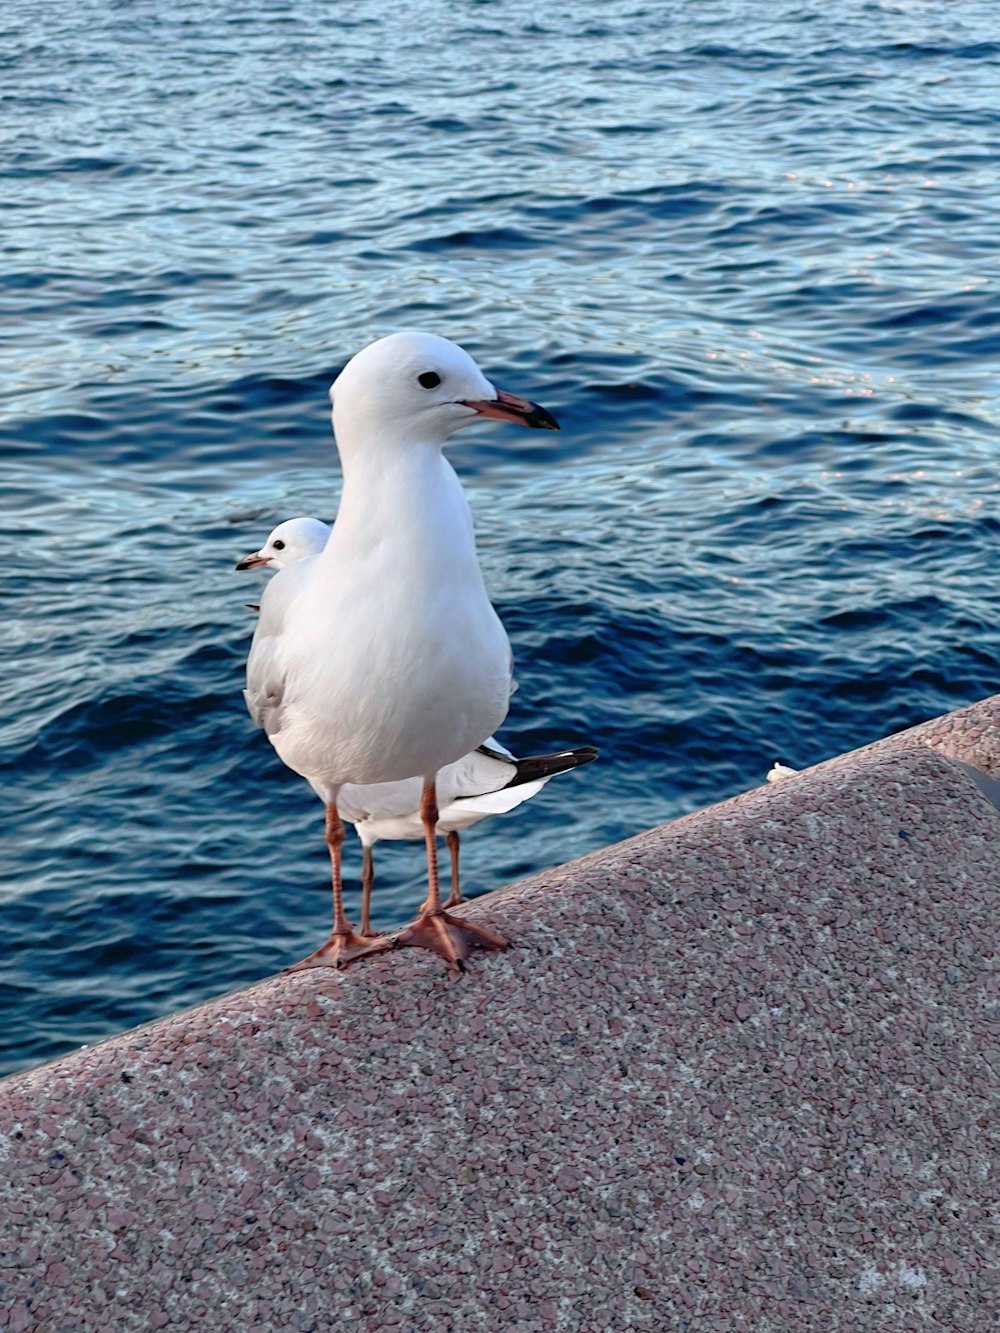 a seagull standing on a ledge near the water